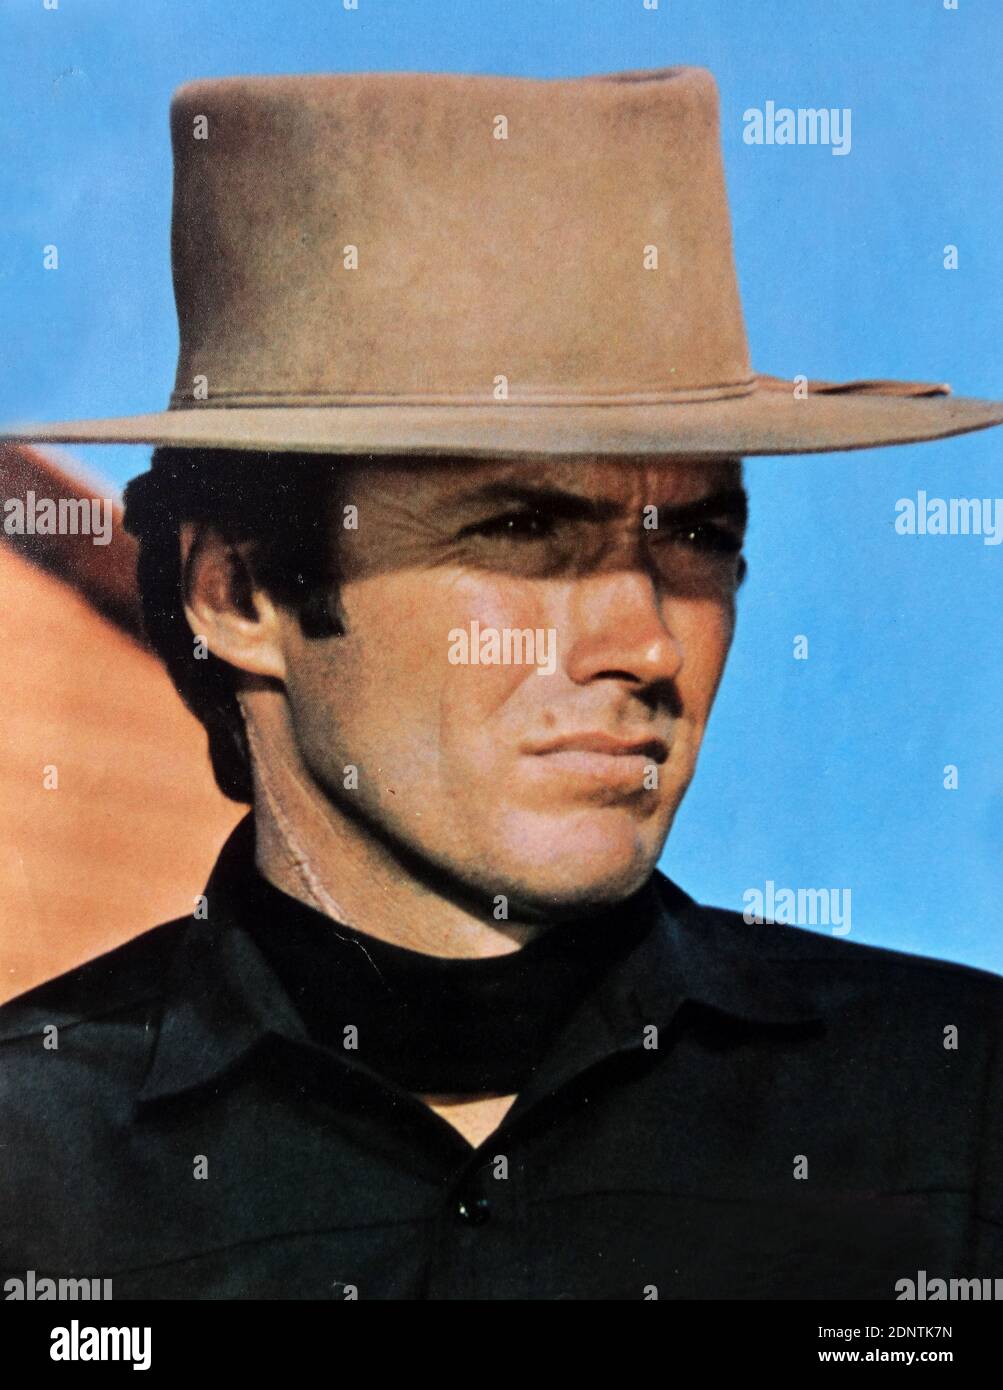 Film still of Clint Eastwood (1930-) from 'A Fistful of Dollars'. Stock Photo